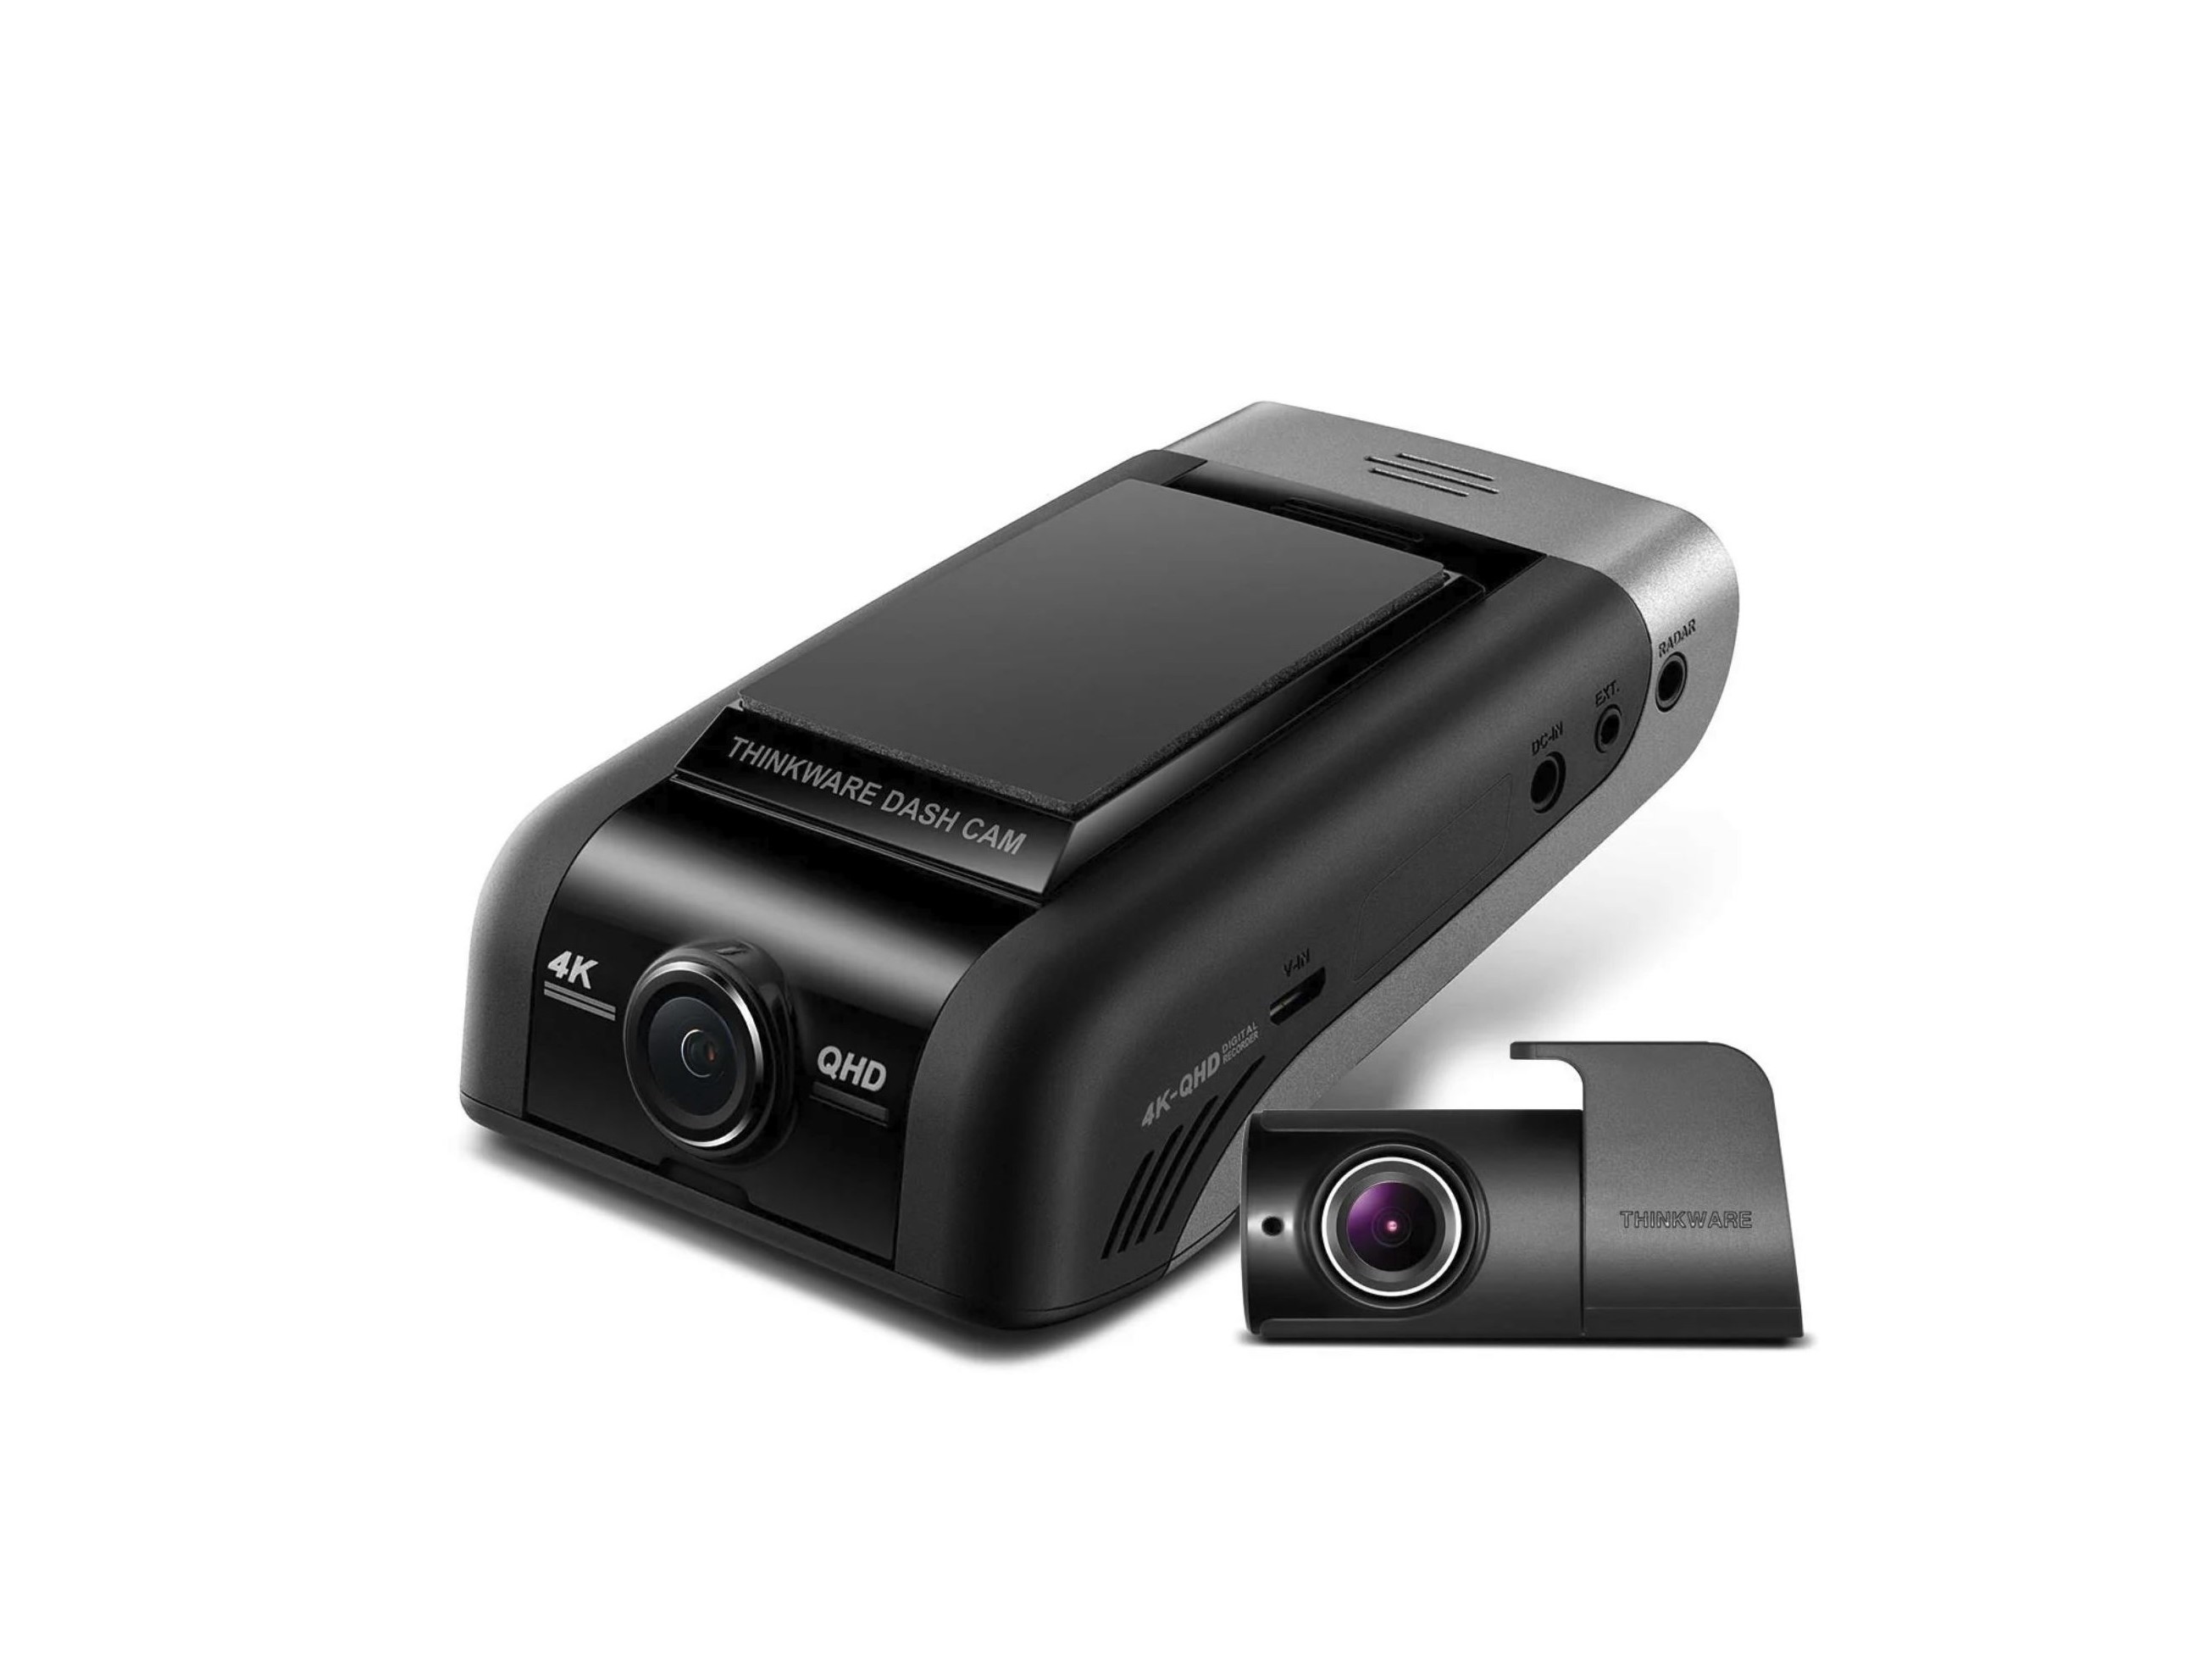 6 Car Brands With An In-Built Dashcam – Dash Cam Discount